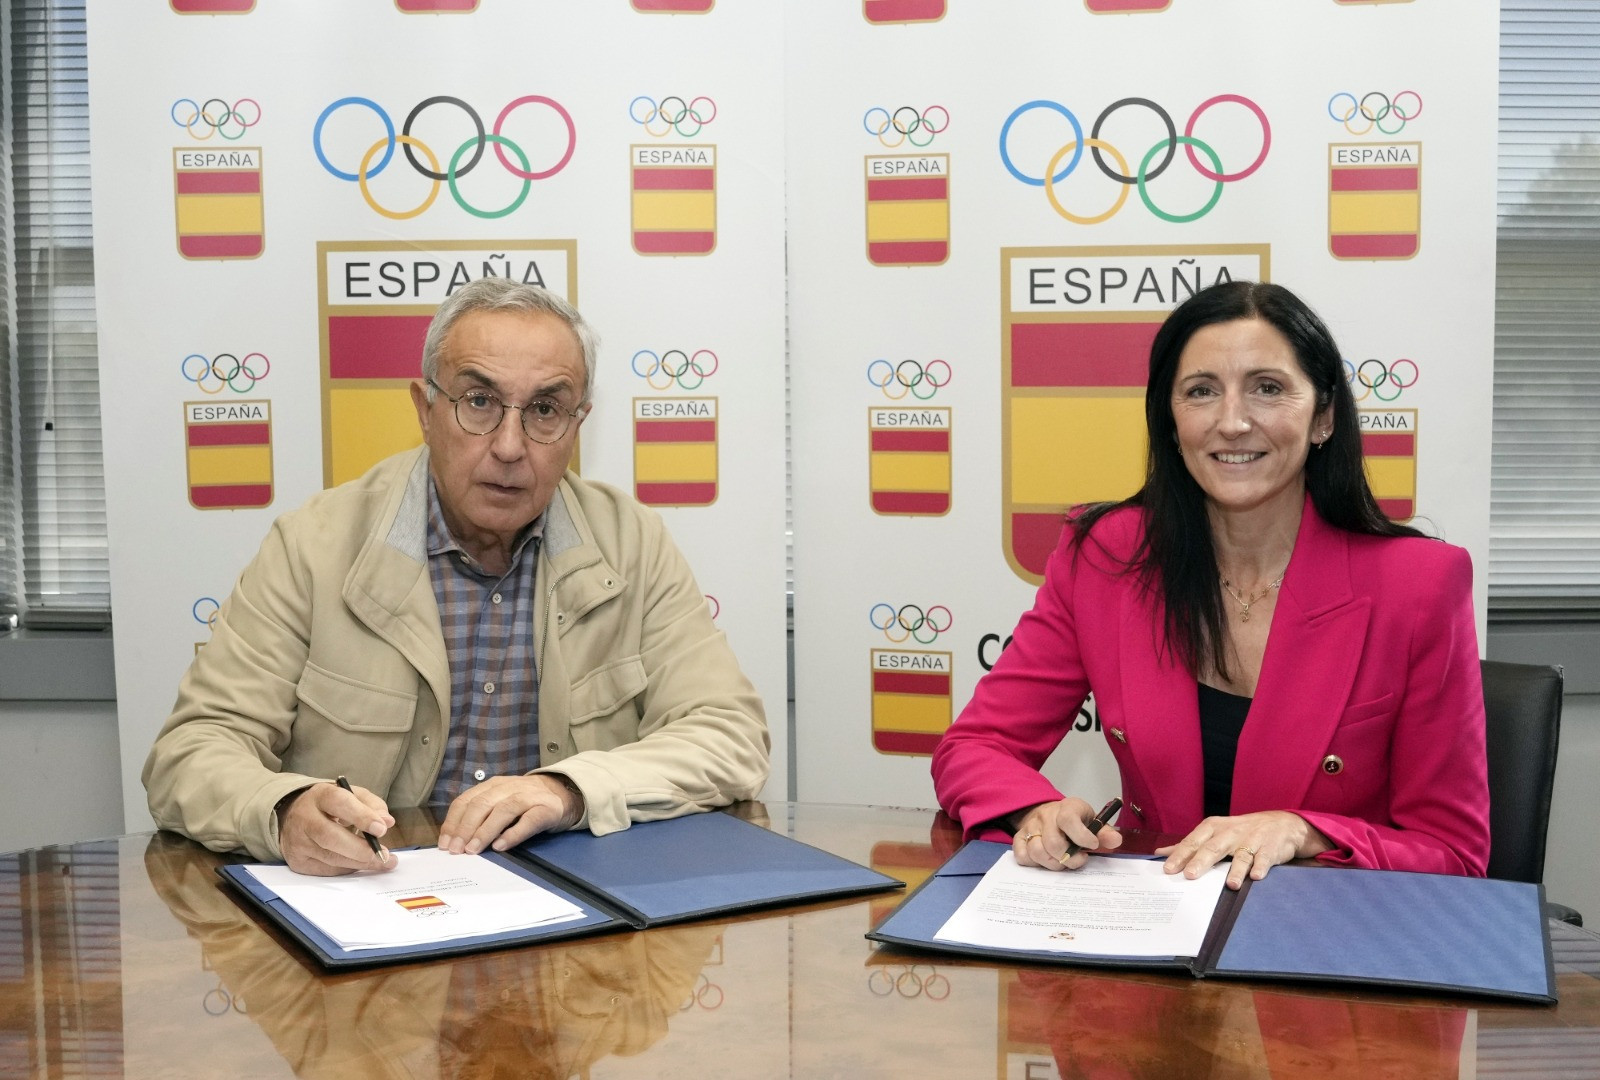  Rowing and golf federations sign up to Spanish Olympic Committee’s sustainability manifesto